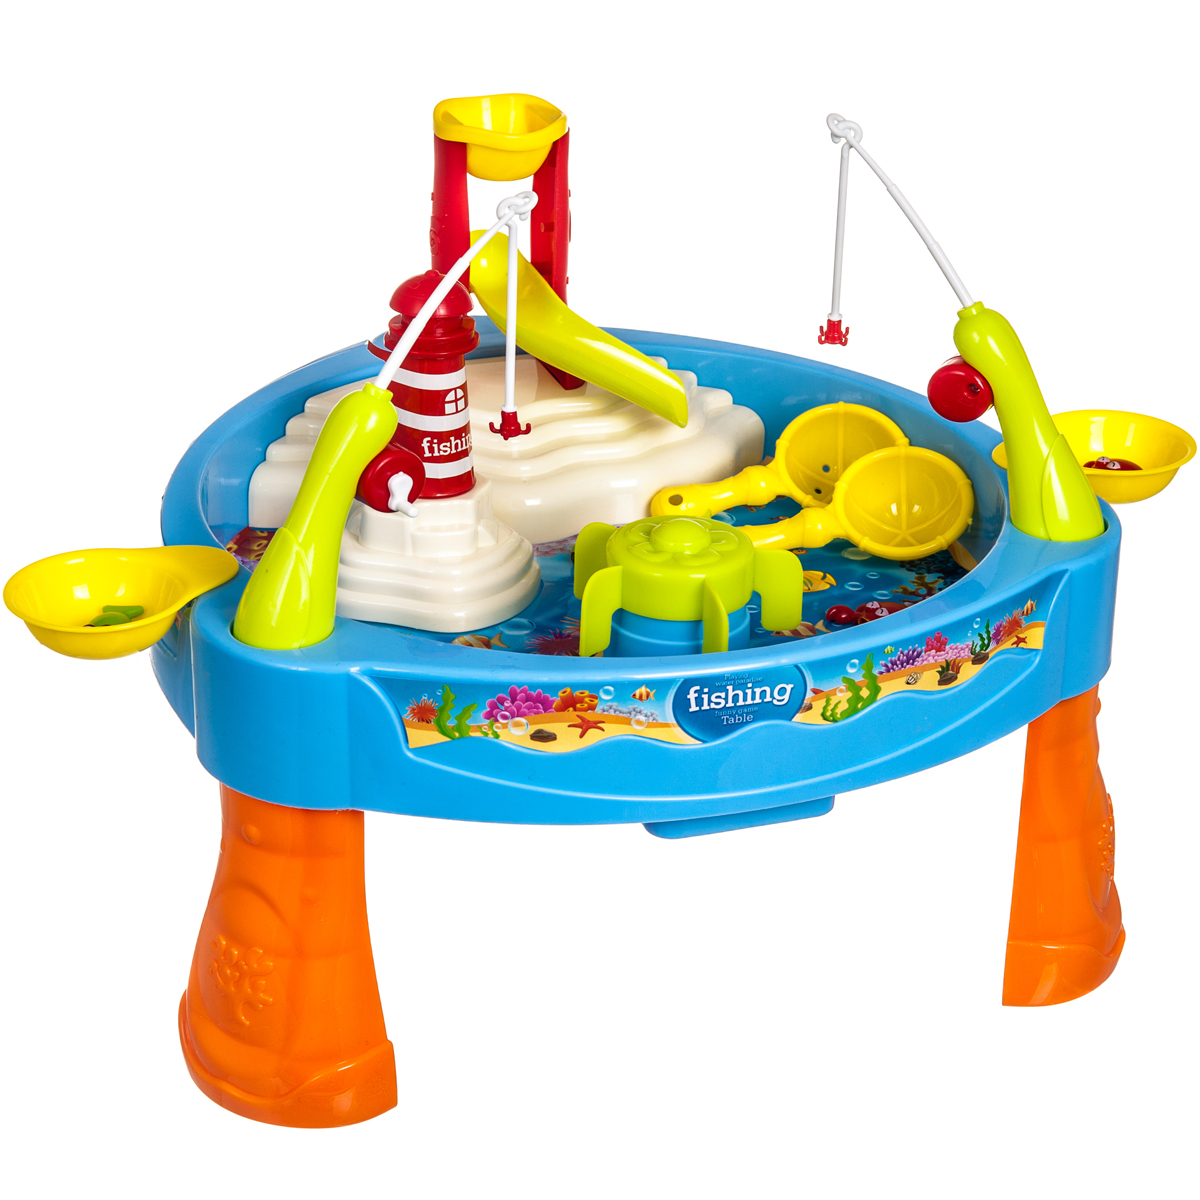 Fishing Table Game Toy Play Waterpark Kids Musical with